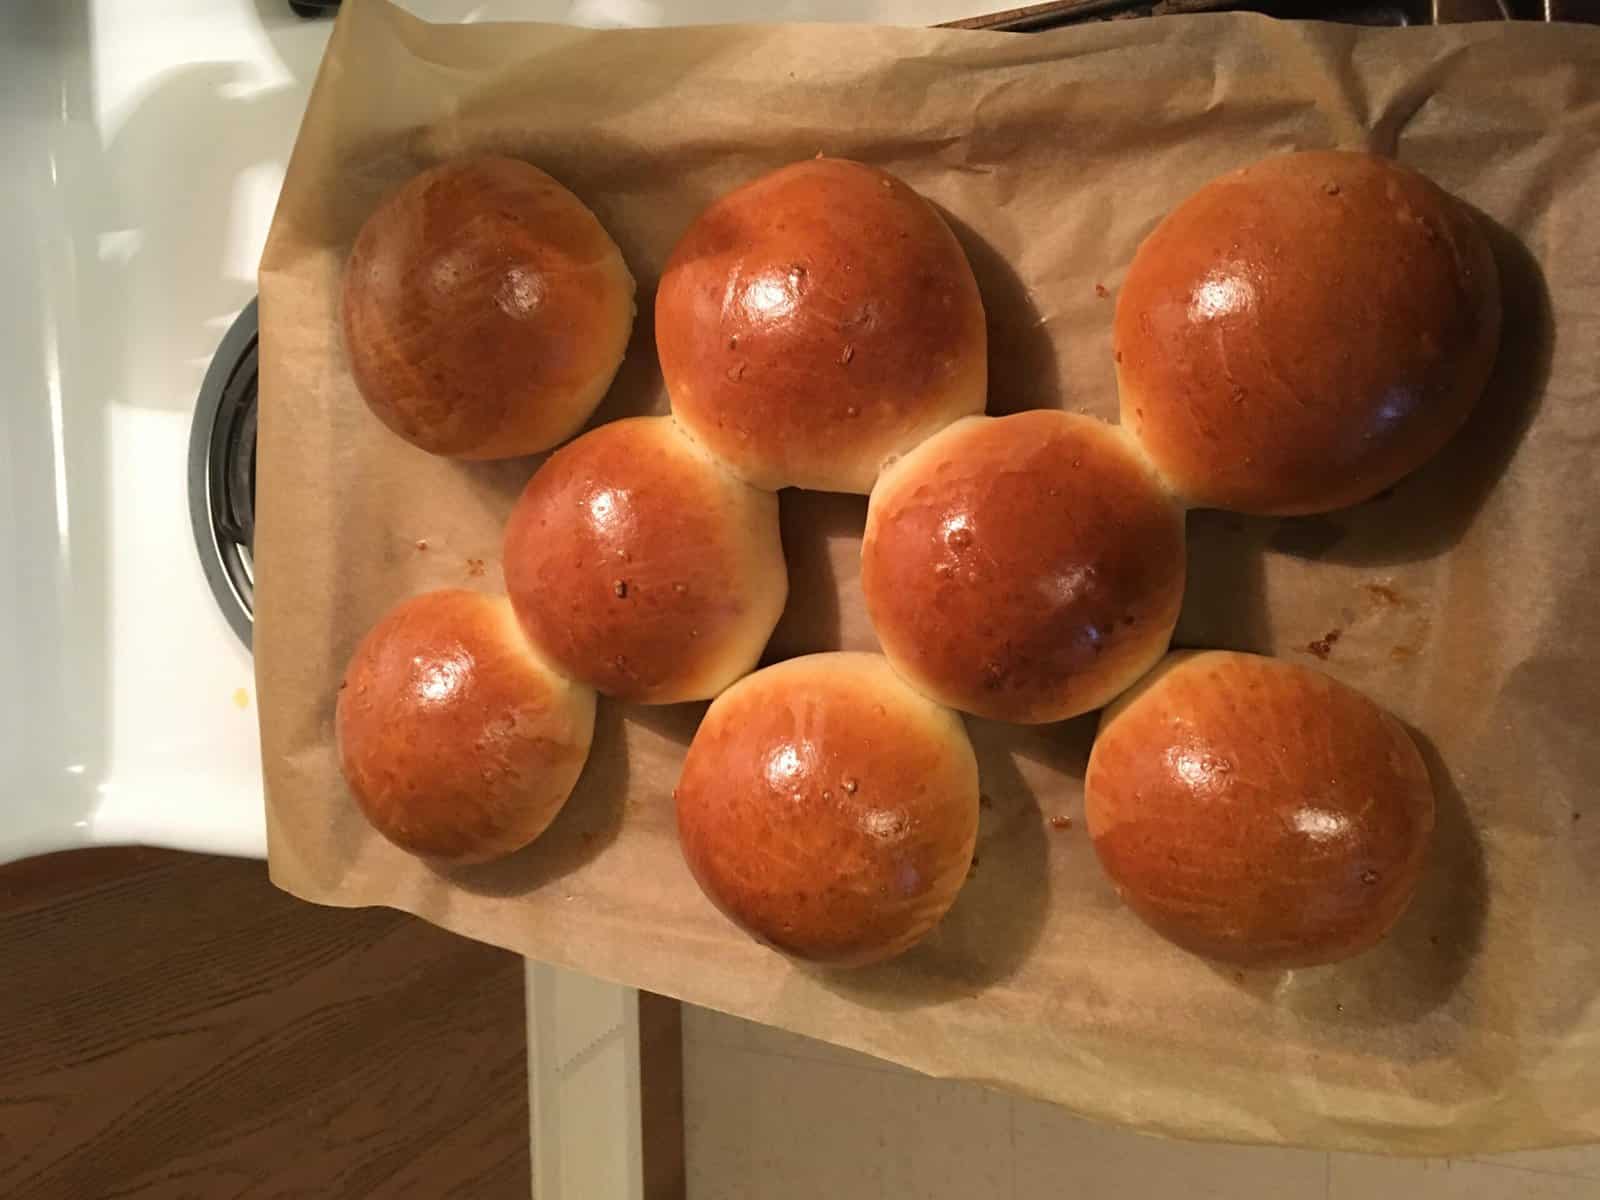  Fresh from the oven, these yeast rolls are the perfect addition to any meal.